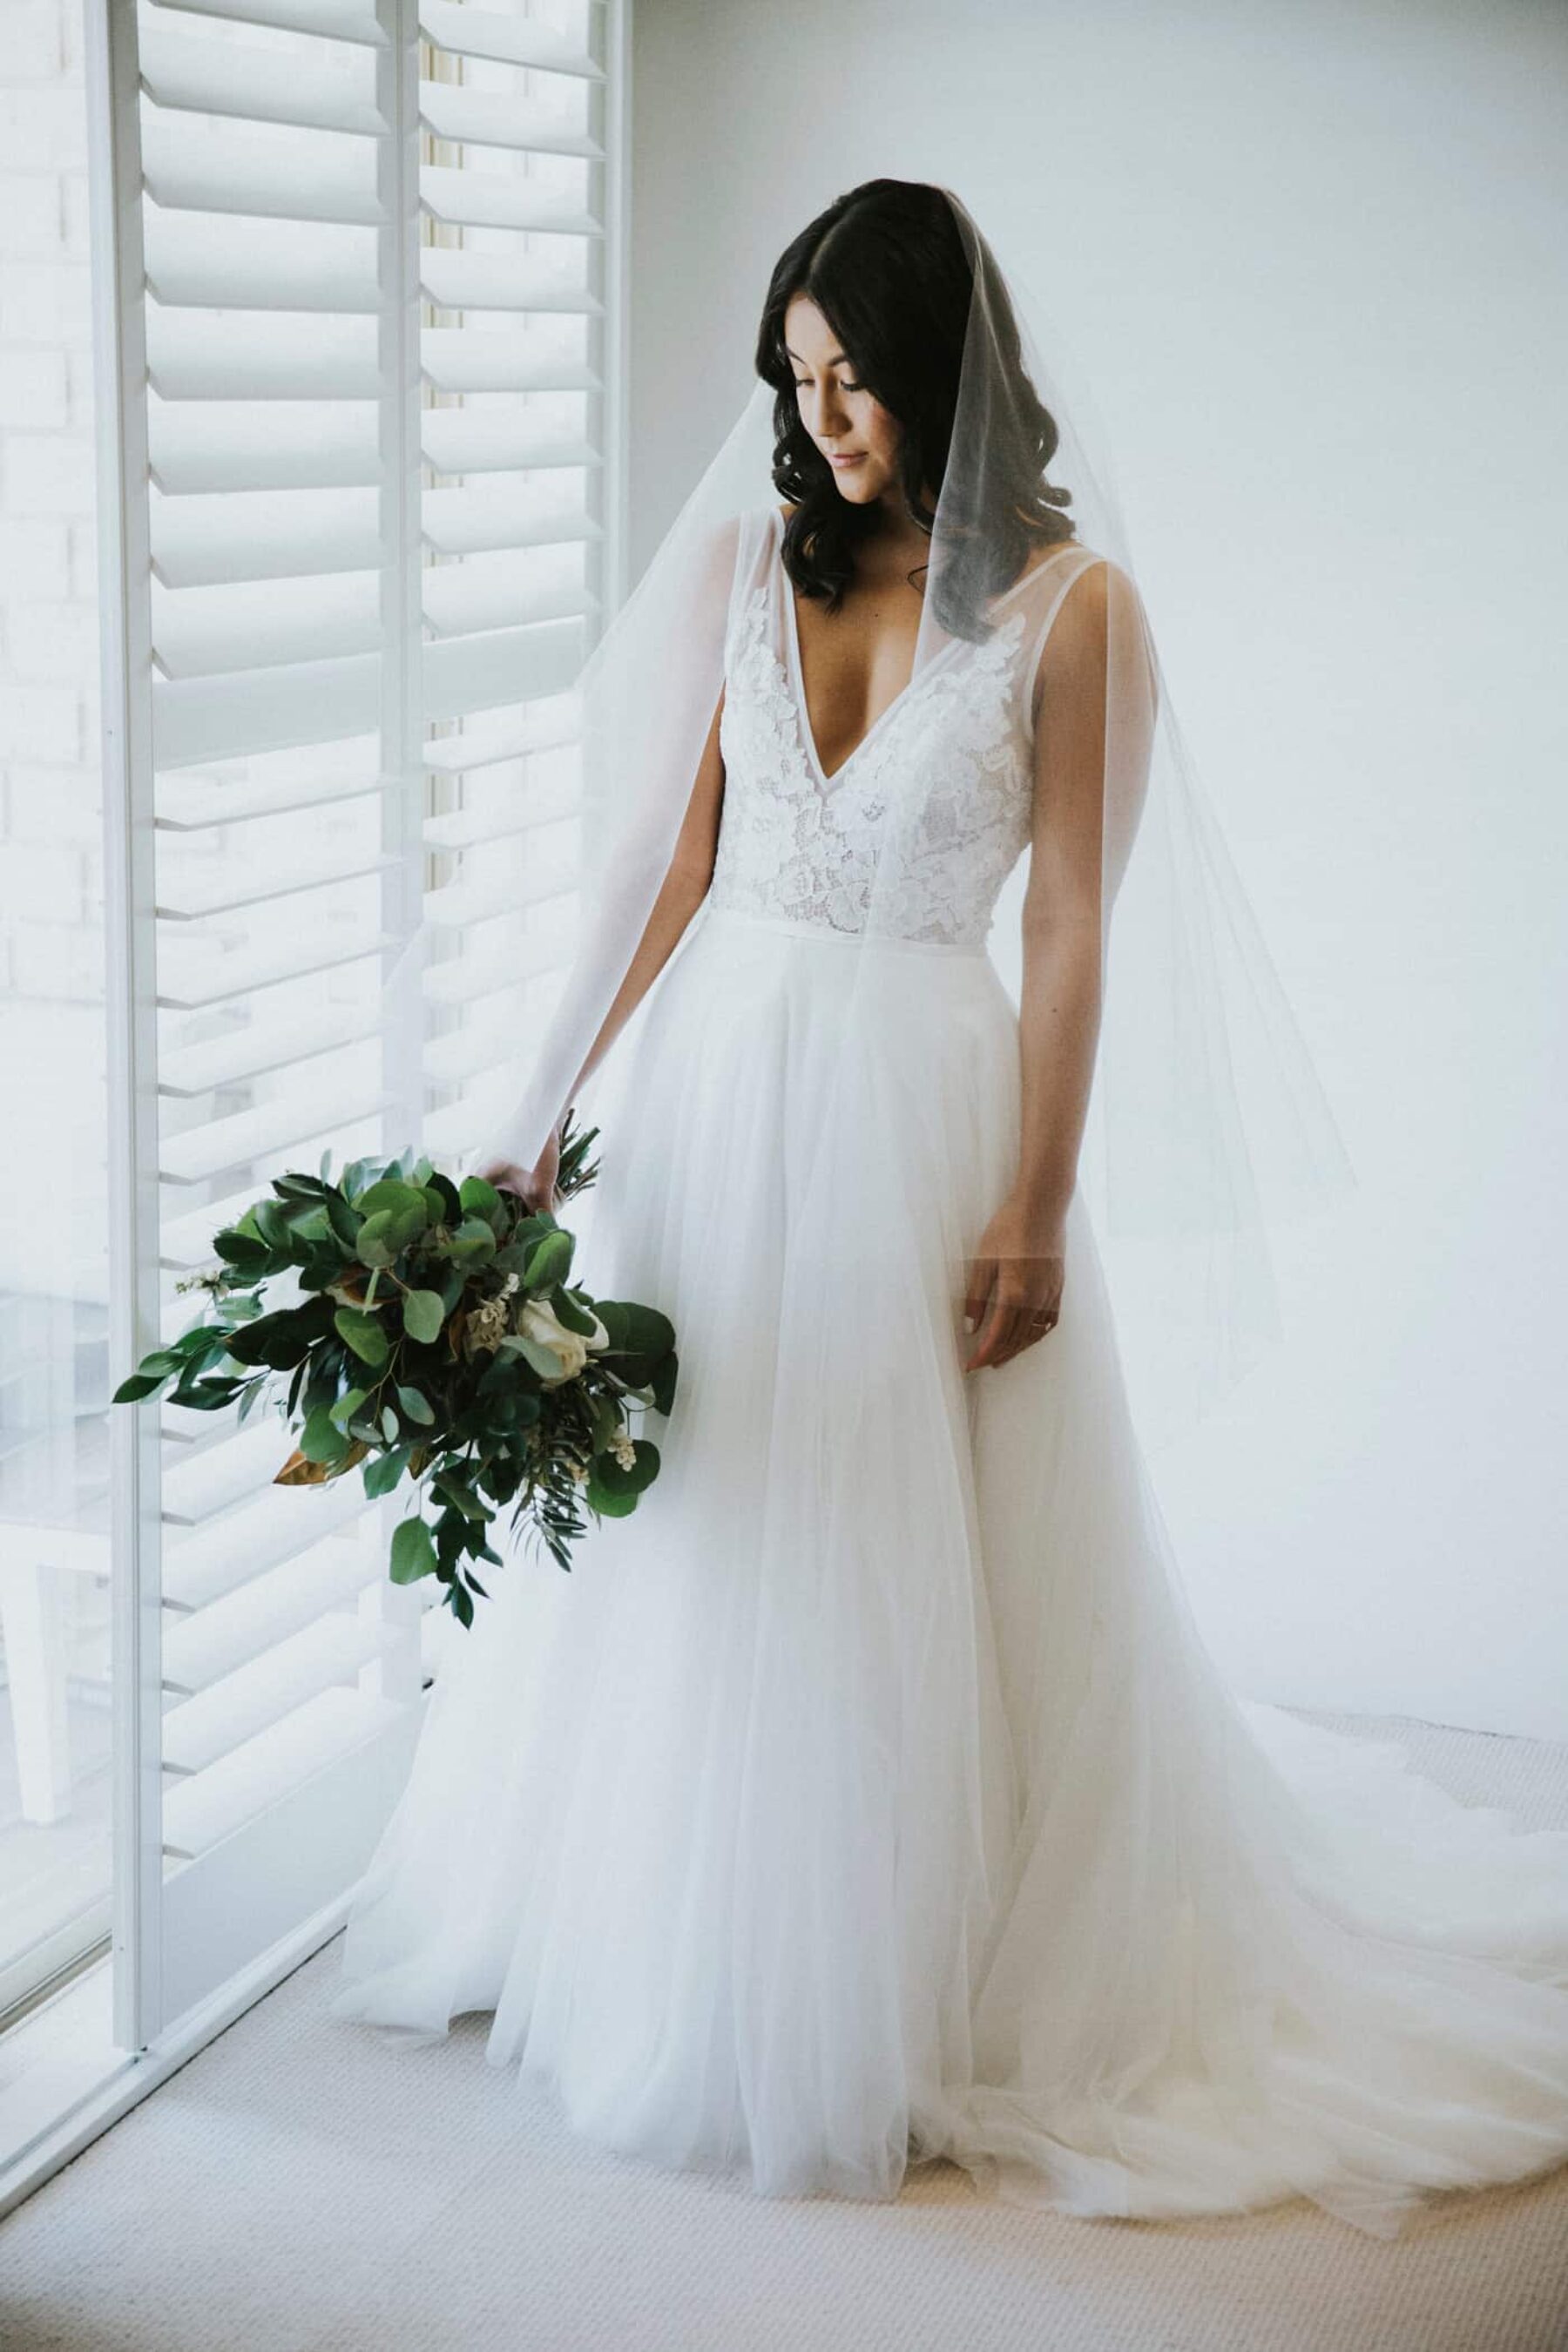 Willow wedding dress from Made with Love Bridal